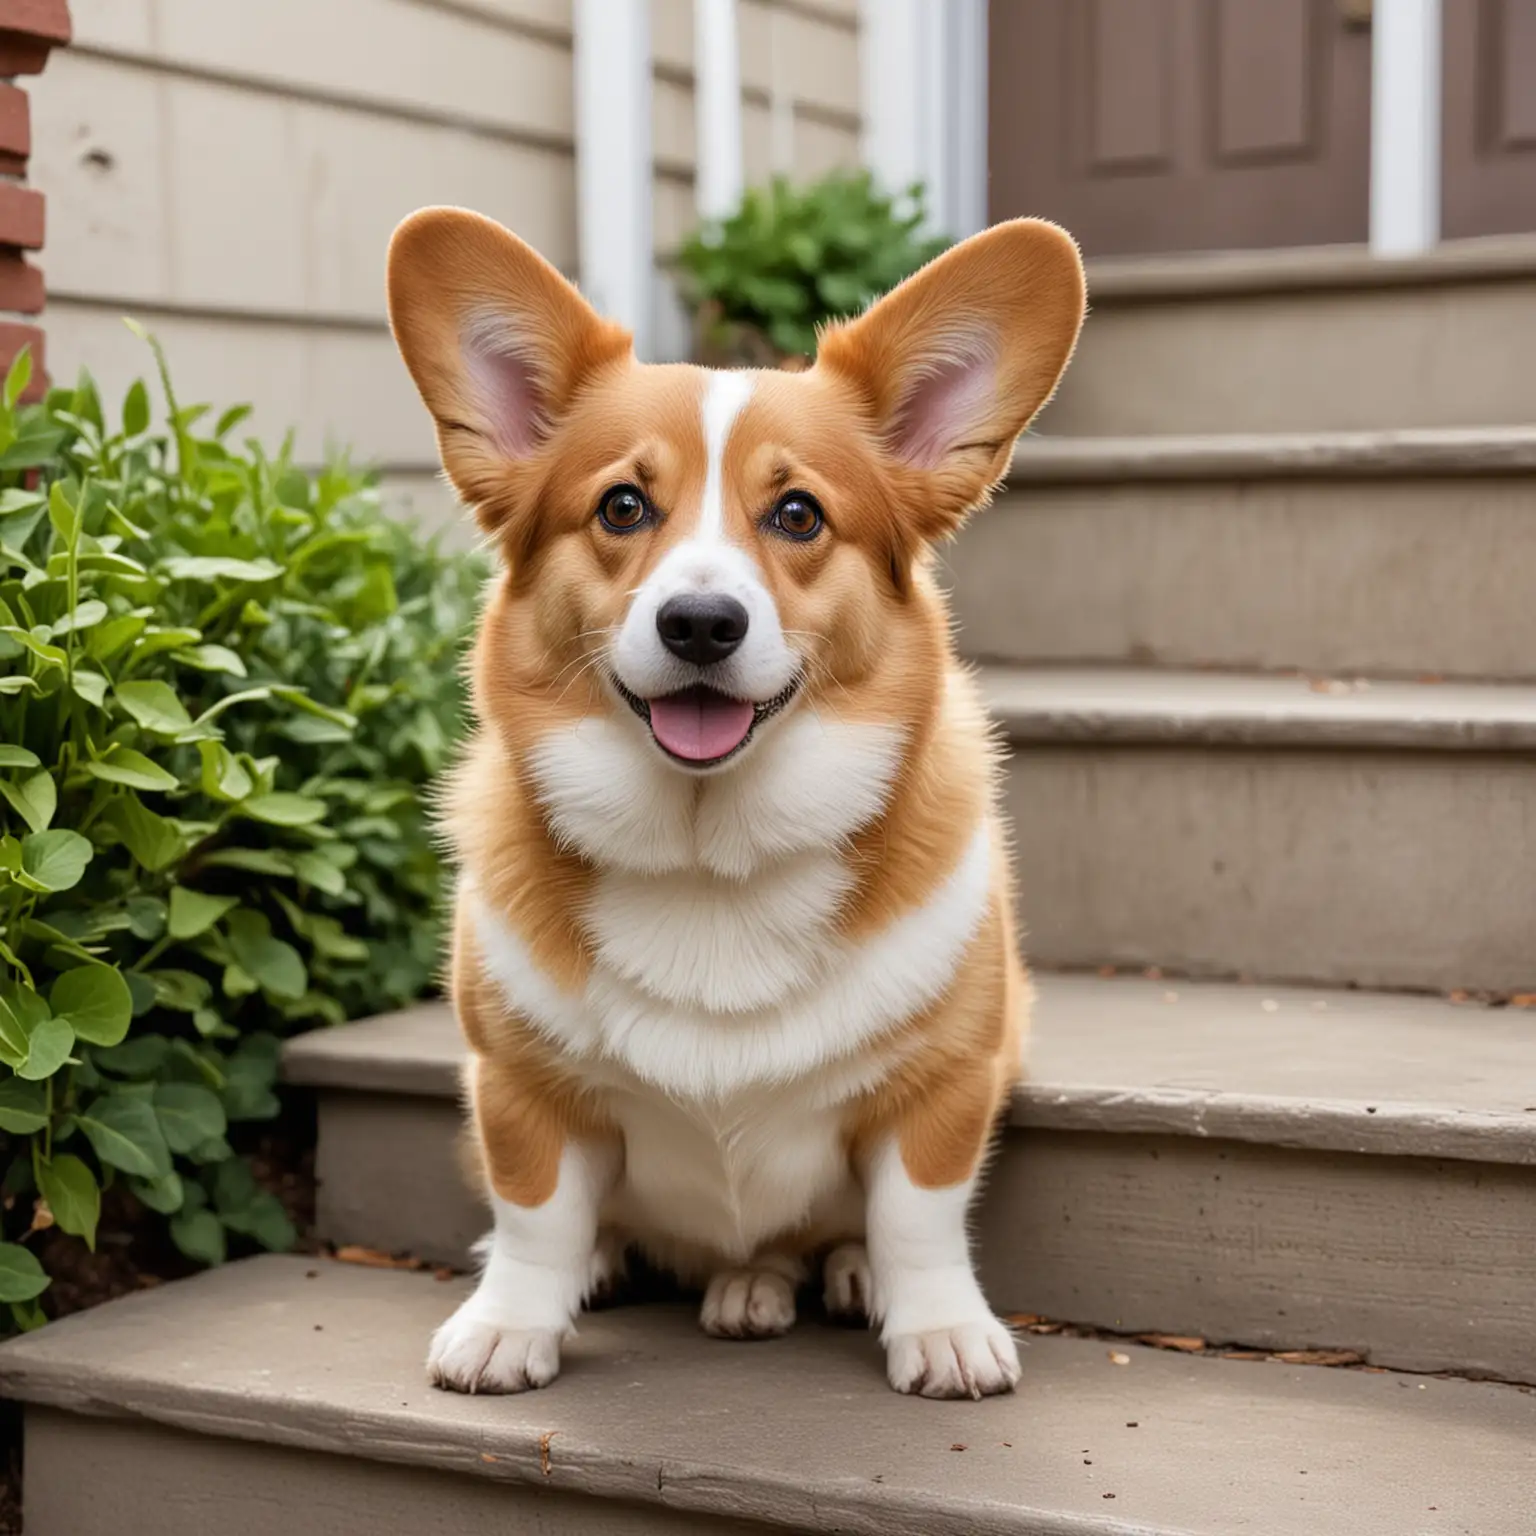 image of a handsome  Pembroke Welsh Corgi  standing on the bottom steps of a stairway from the backyard into the house